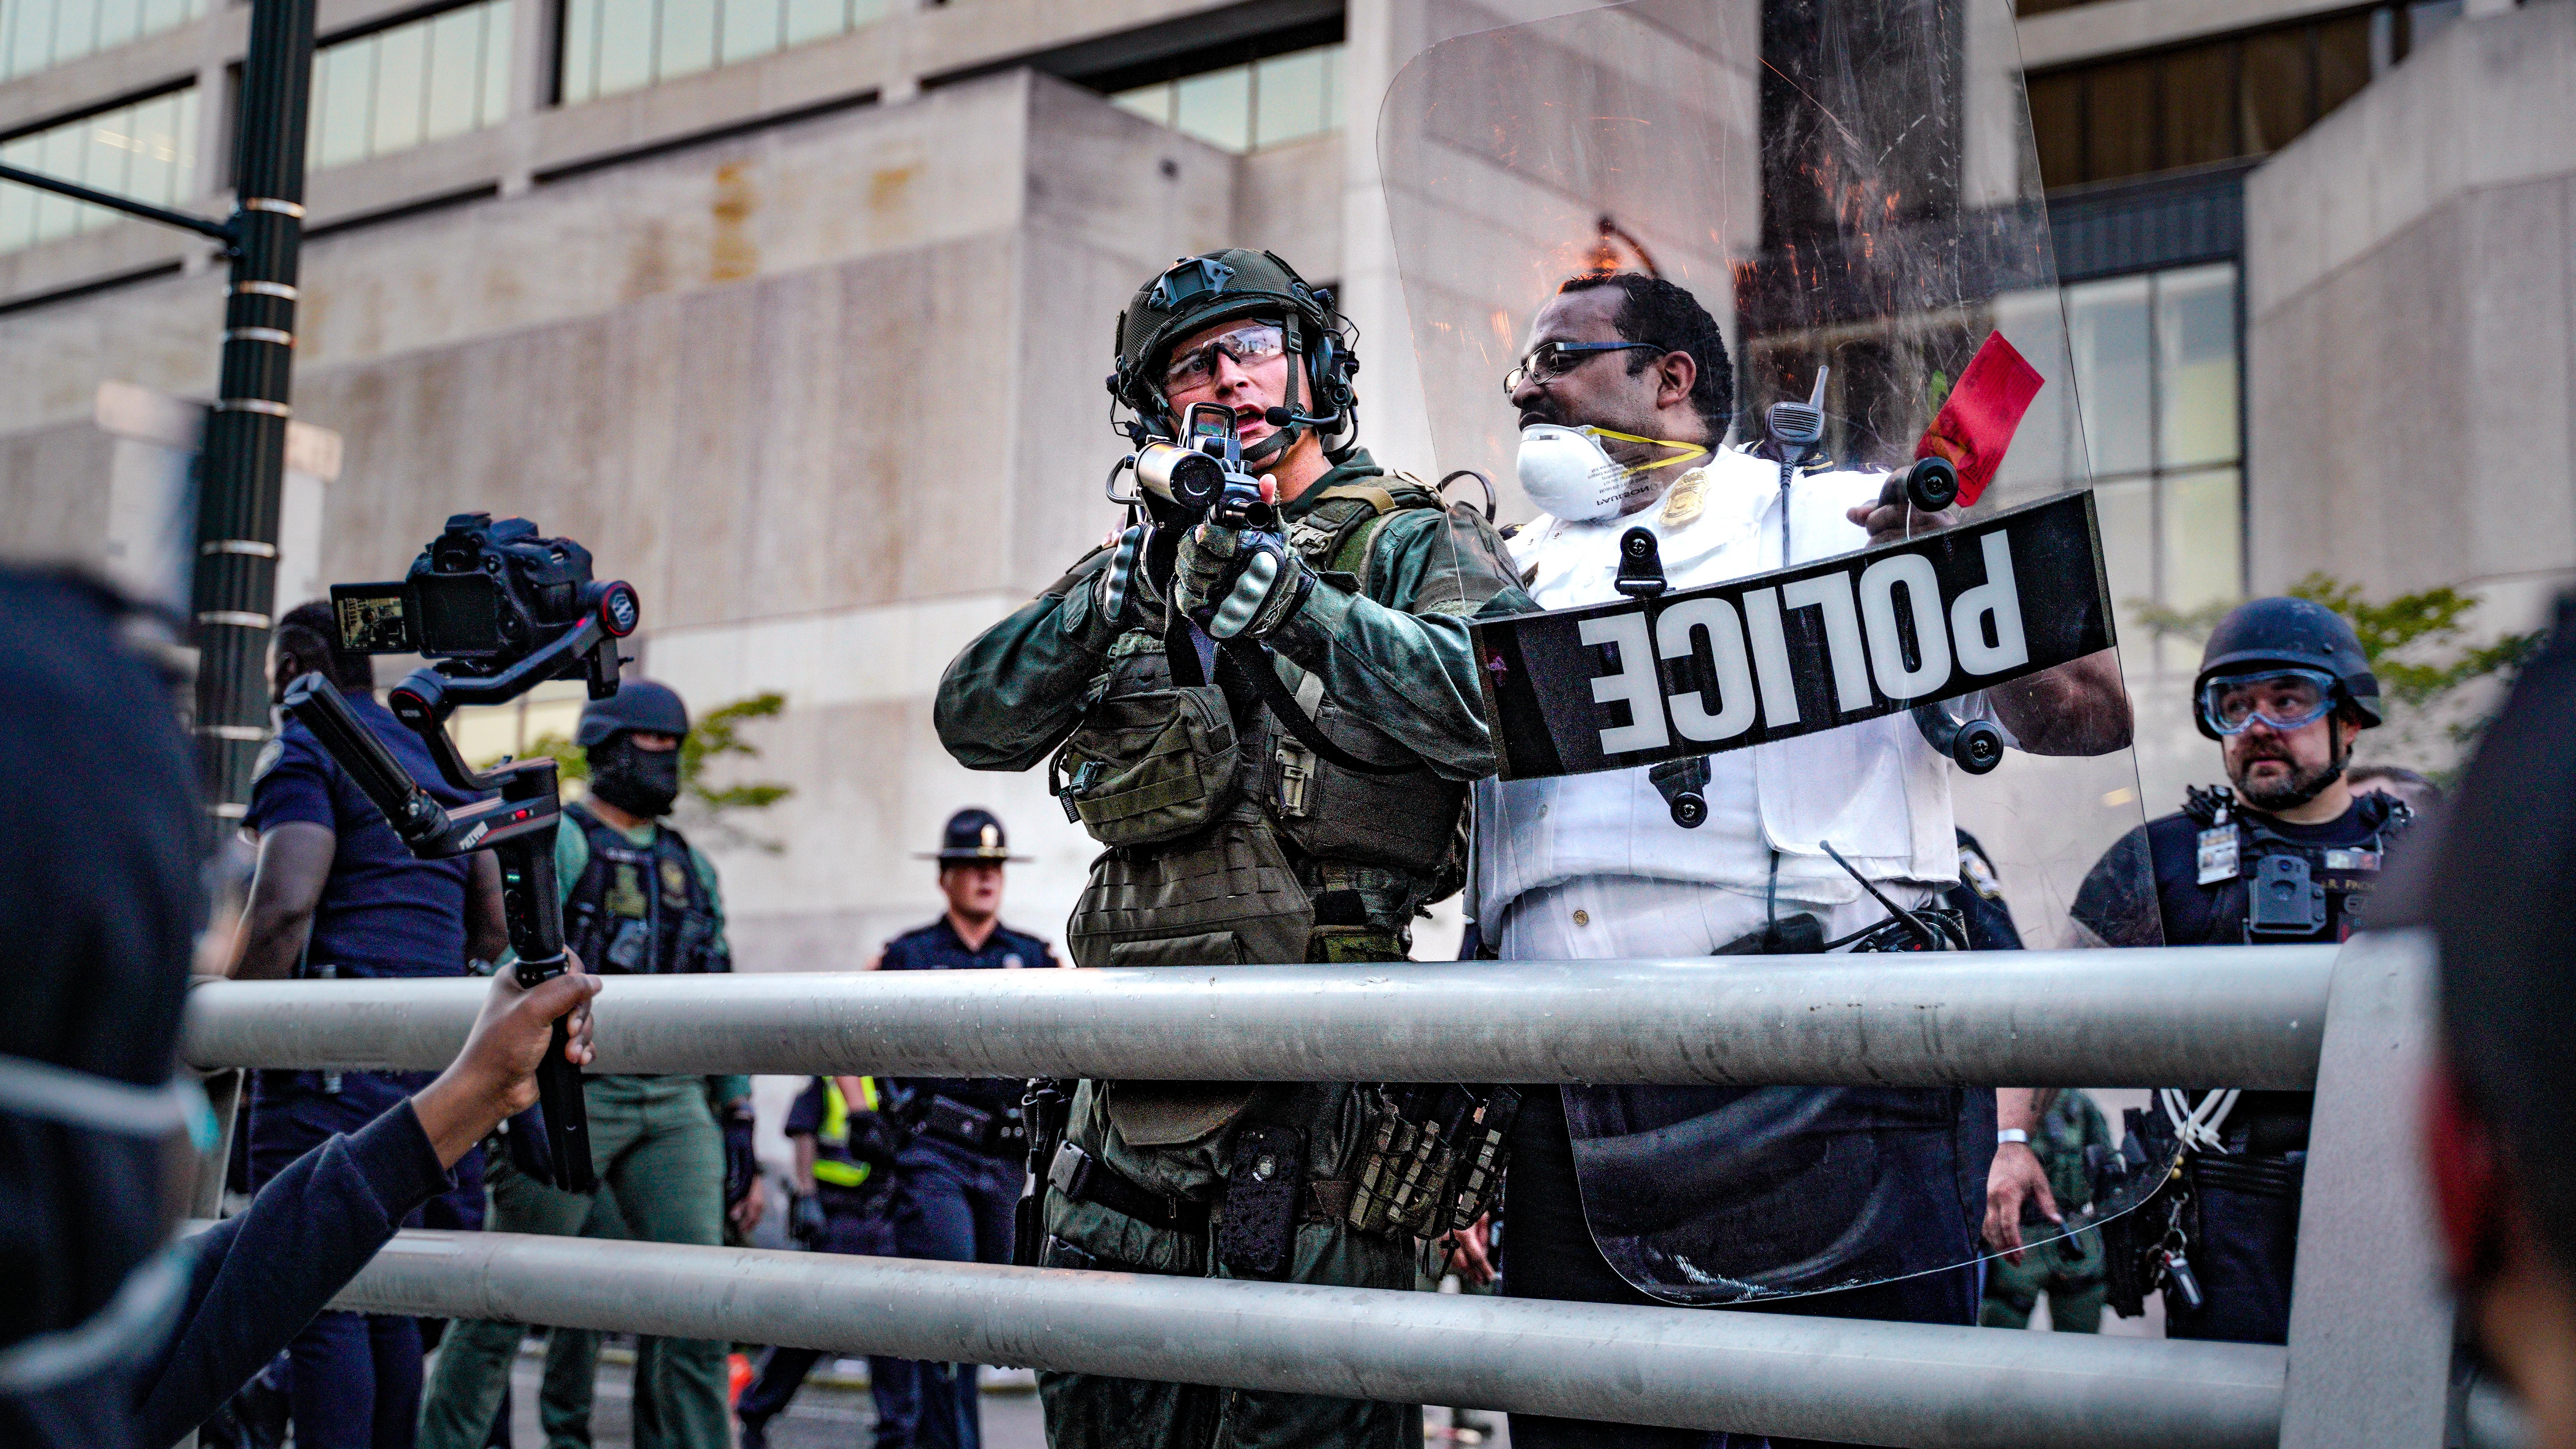 A protester holds a camera in front of a police officer in riot gear.